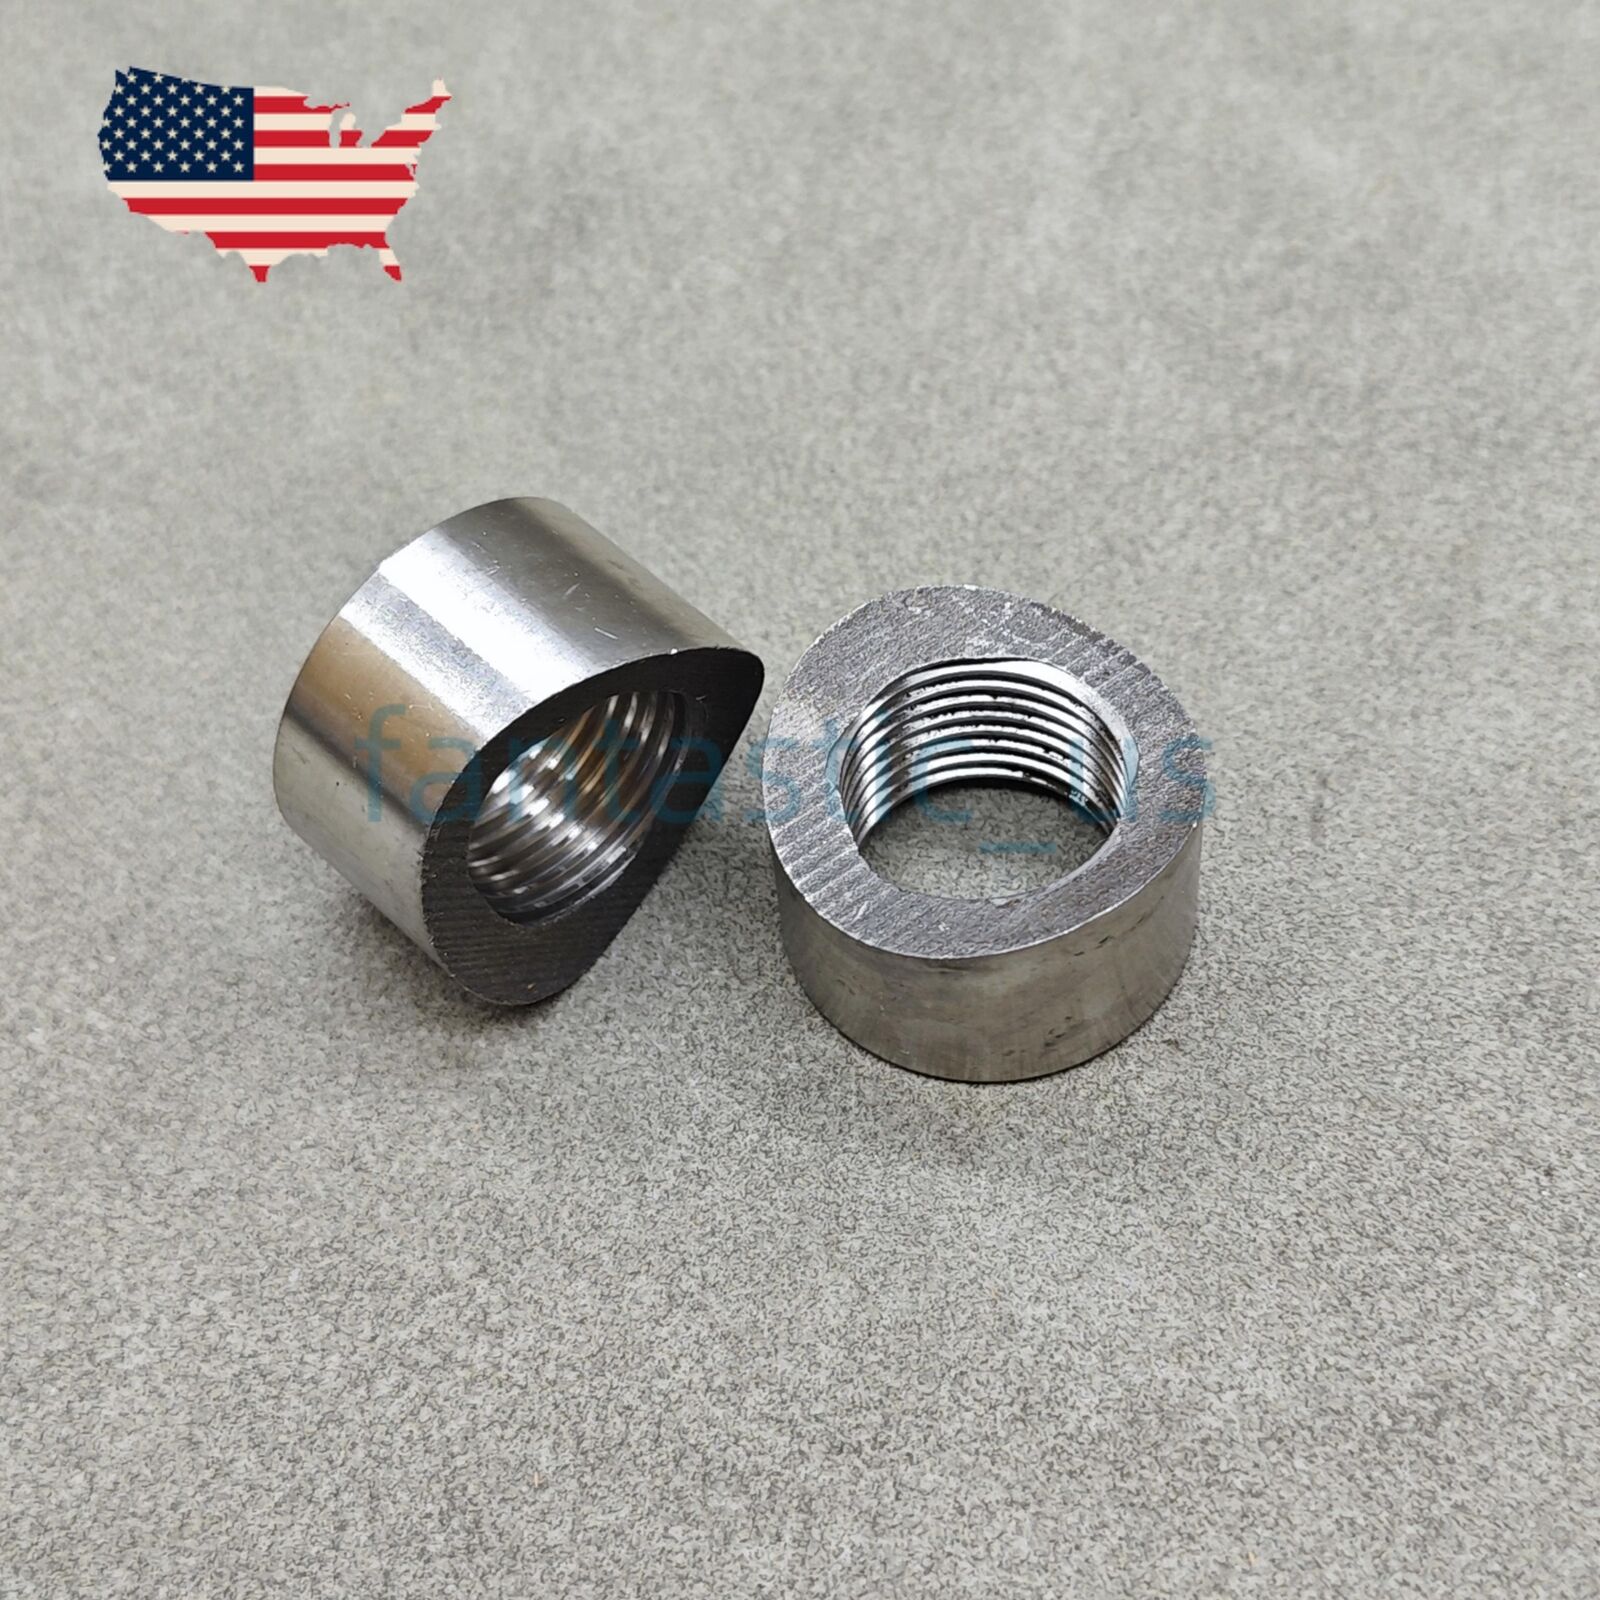 2PC O2 Oxygen Sensor Curve Notched Nut Bung M18 X 1.5 304 Stainless Steel